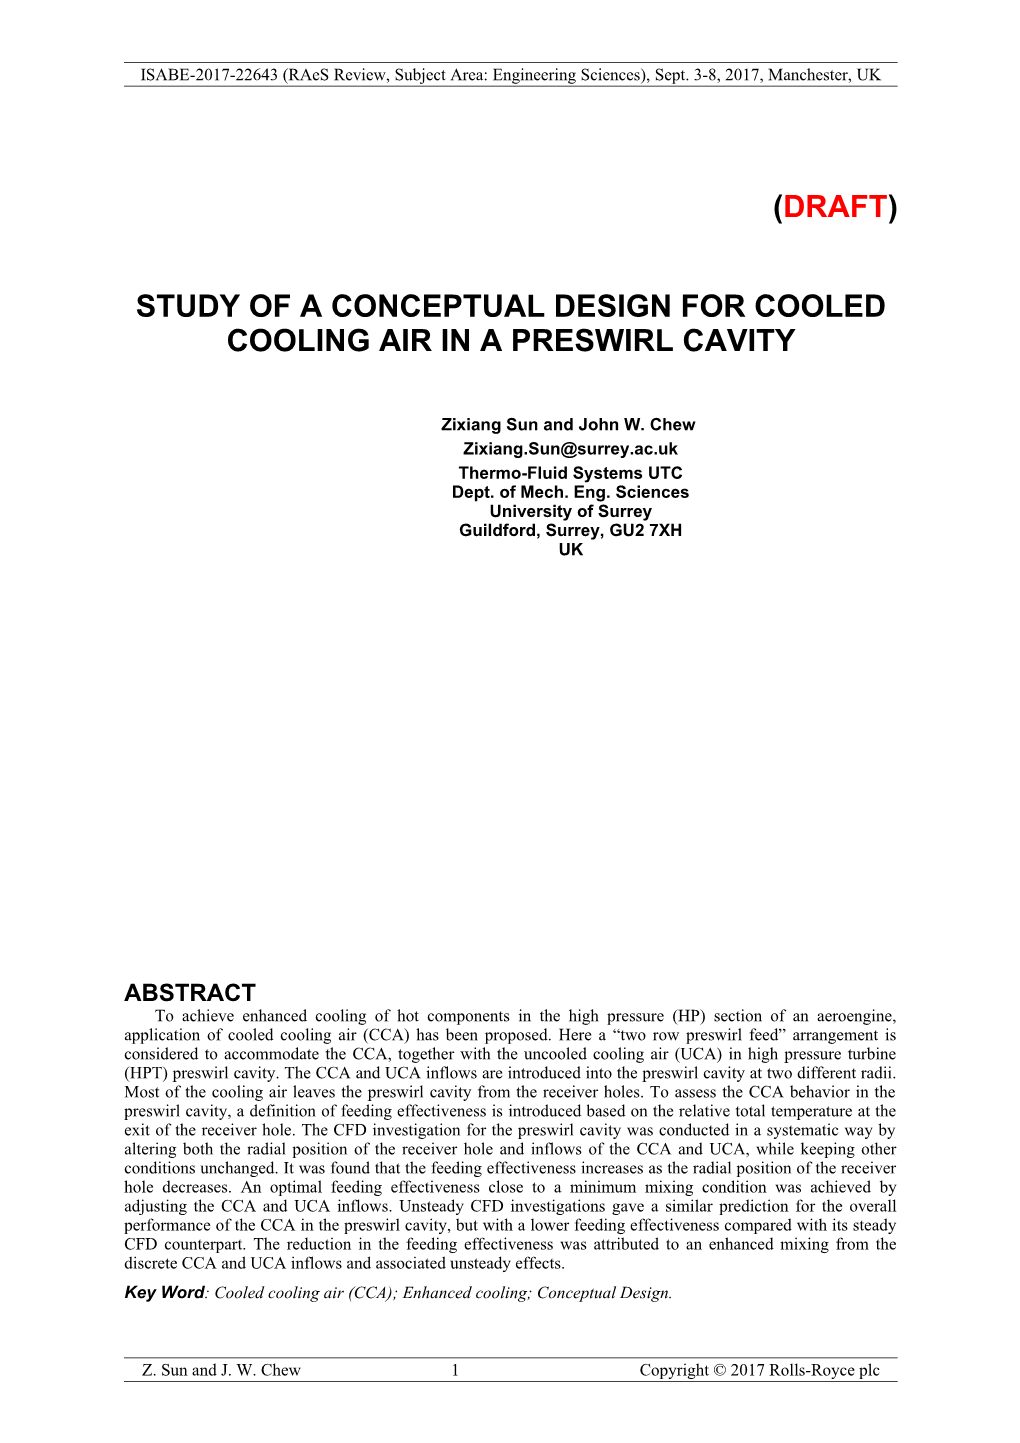 Study of a Conceptual Design for Cooled Cooling Air in a Preswirl Cavity